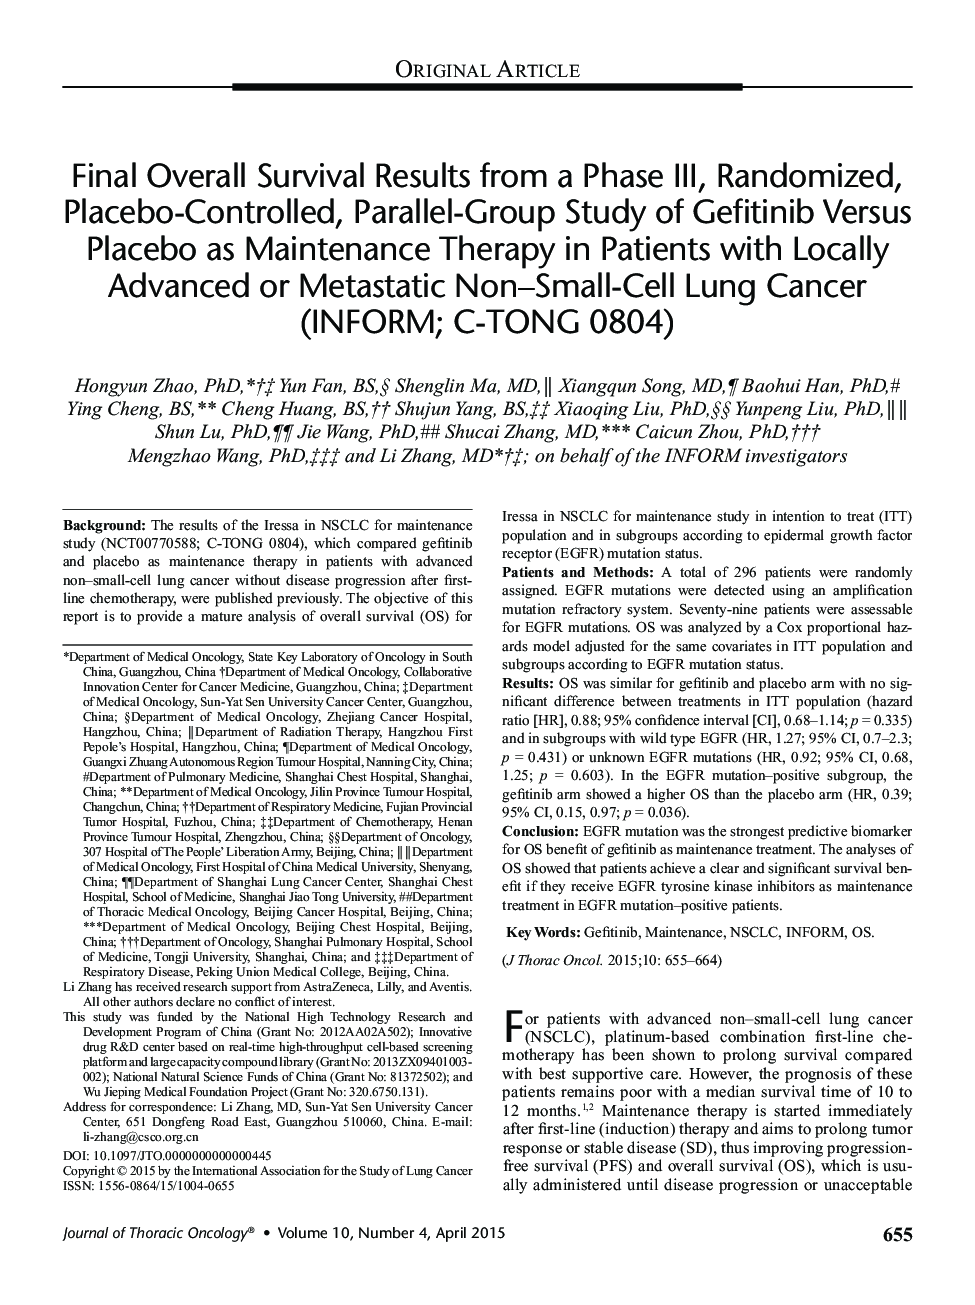 Final Overall Survival Results from a Phase III, Randomized, Placebo-Controlled, Parallel-Group Study of Gefitinib Versus Placebo as Maintenance Therapy in Patients with Locally Advanced or Metastatic Non-Small-Cell Lung Cancer (INFORM; C-TONG 0804)